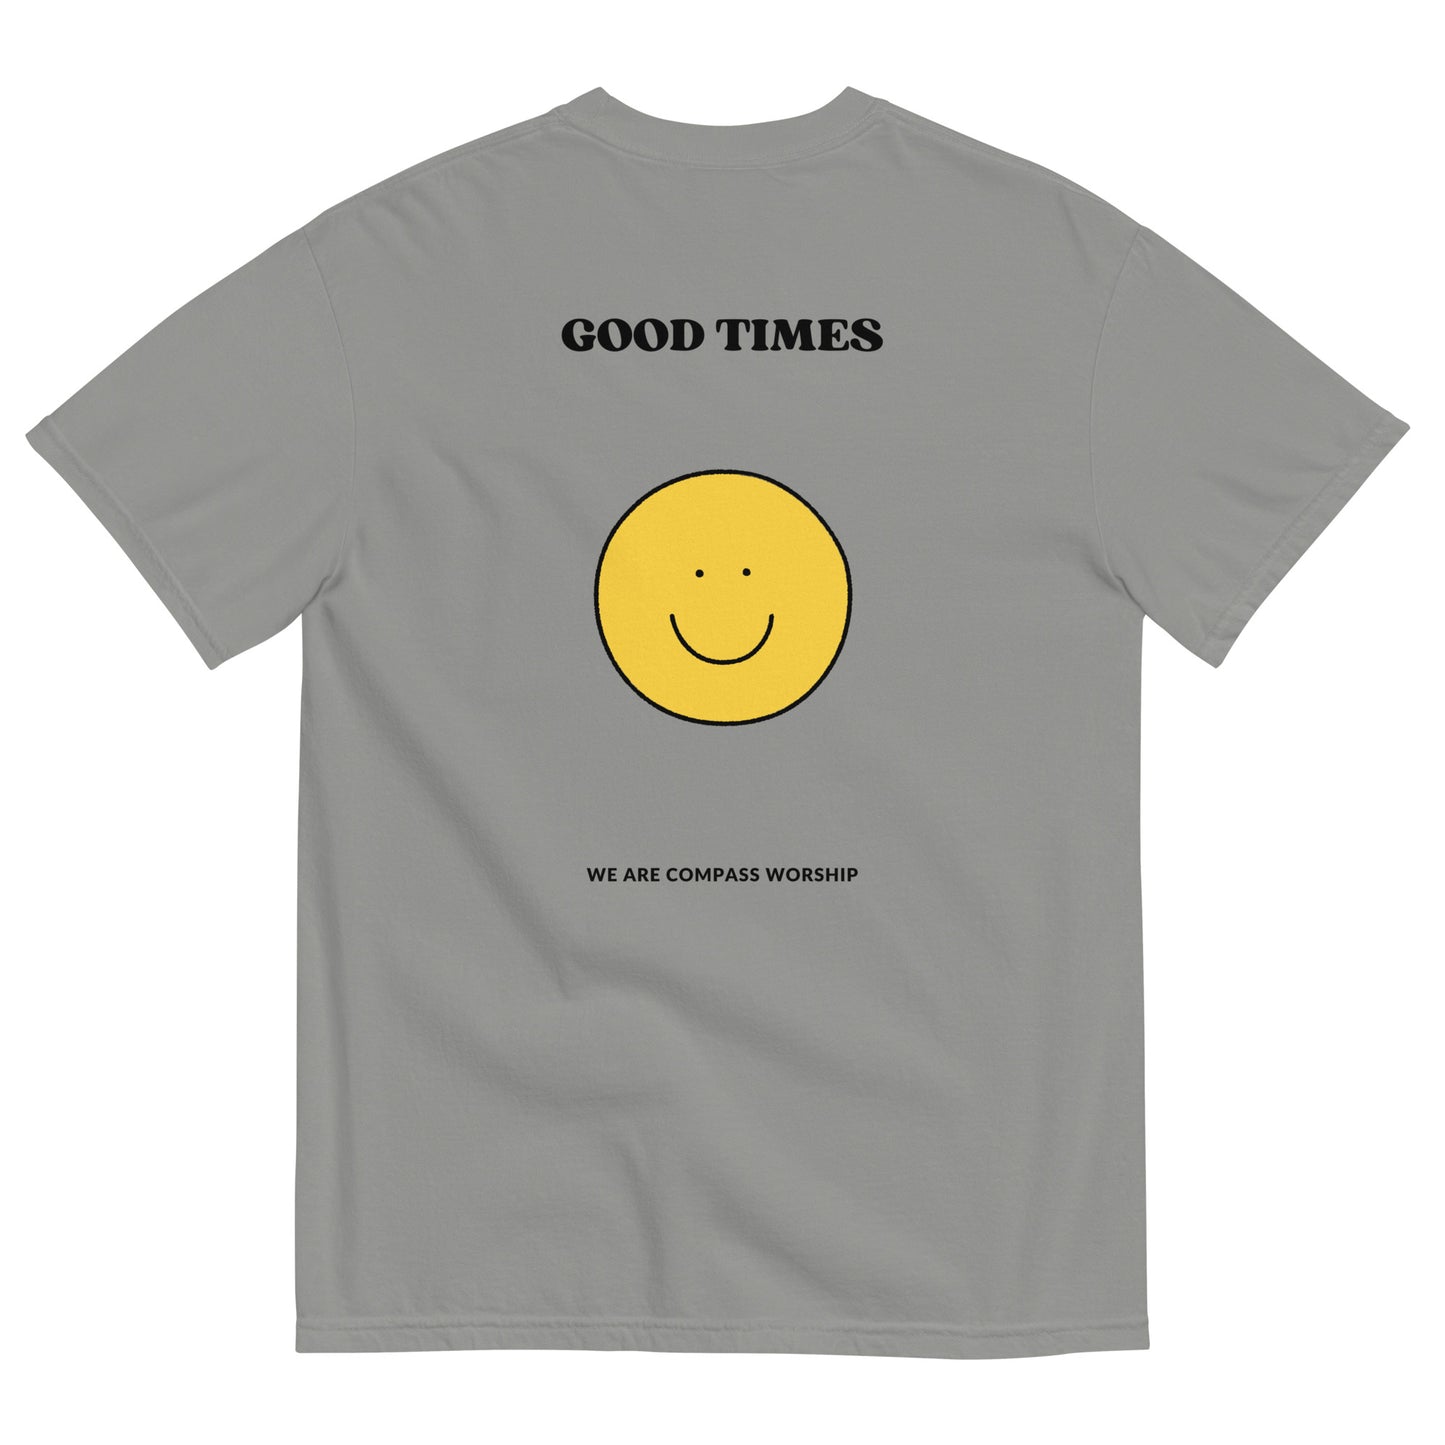 Black Embroidered Praise! (Good Times) T-Shirt